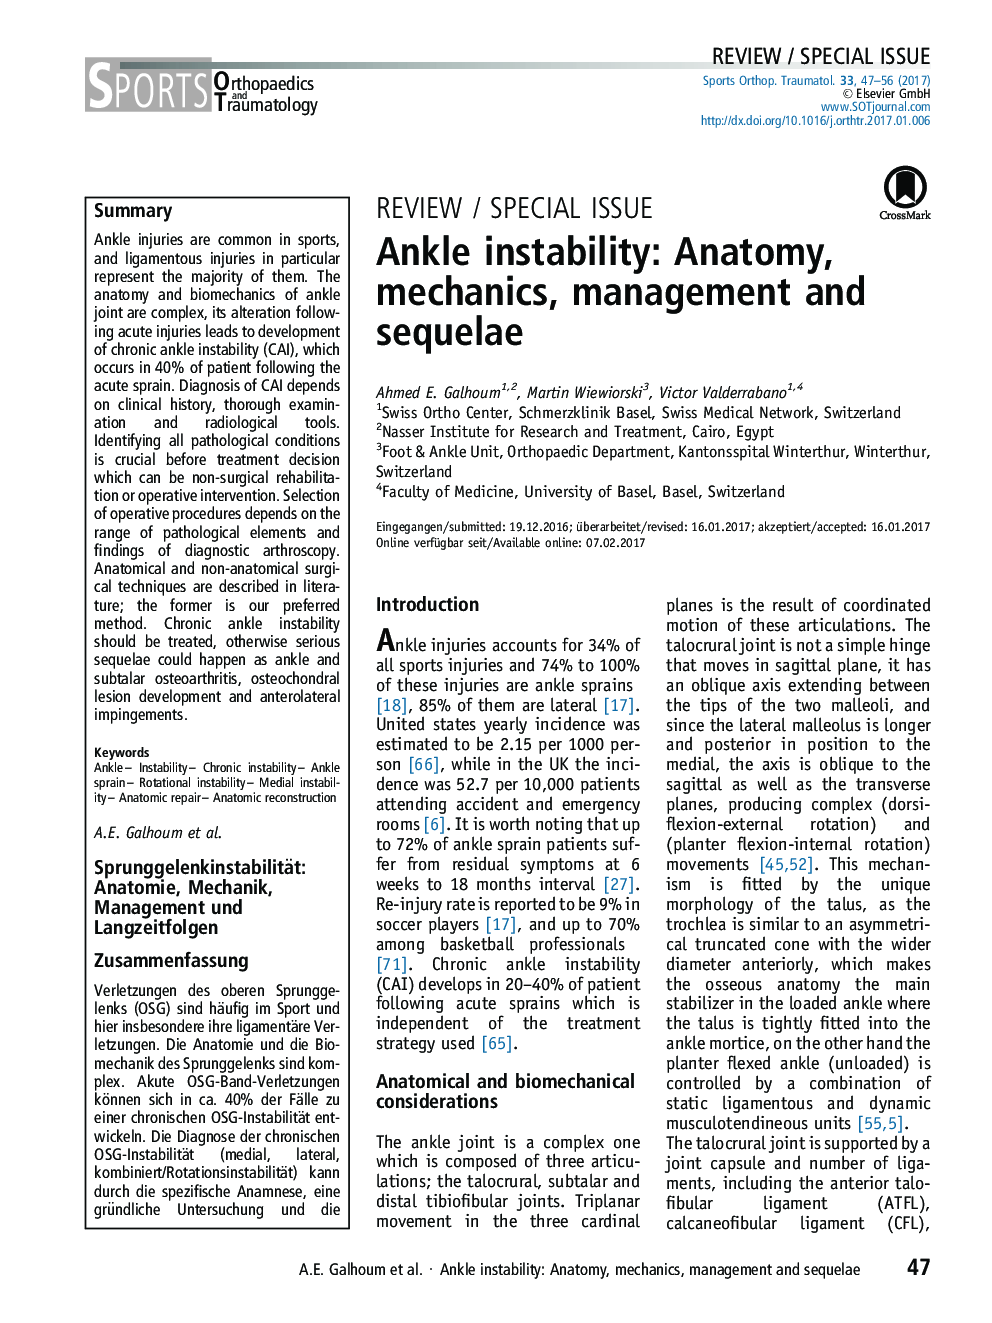 Ankle instability: Anatomy, mechanics, management and sequelae